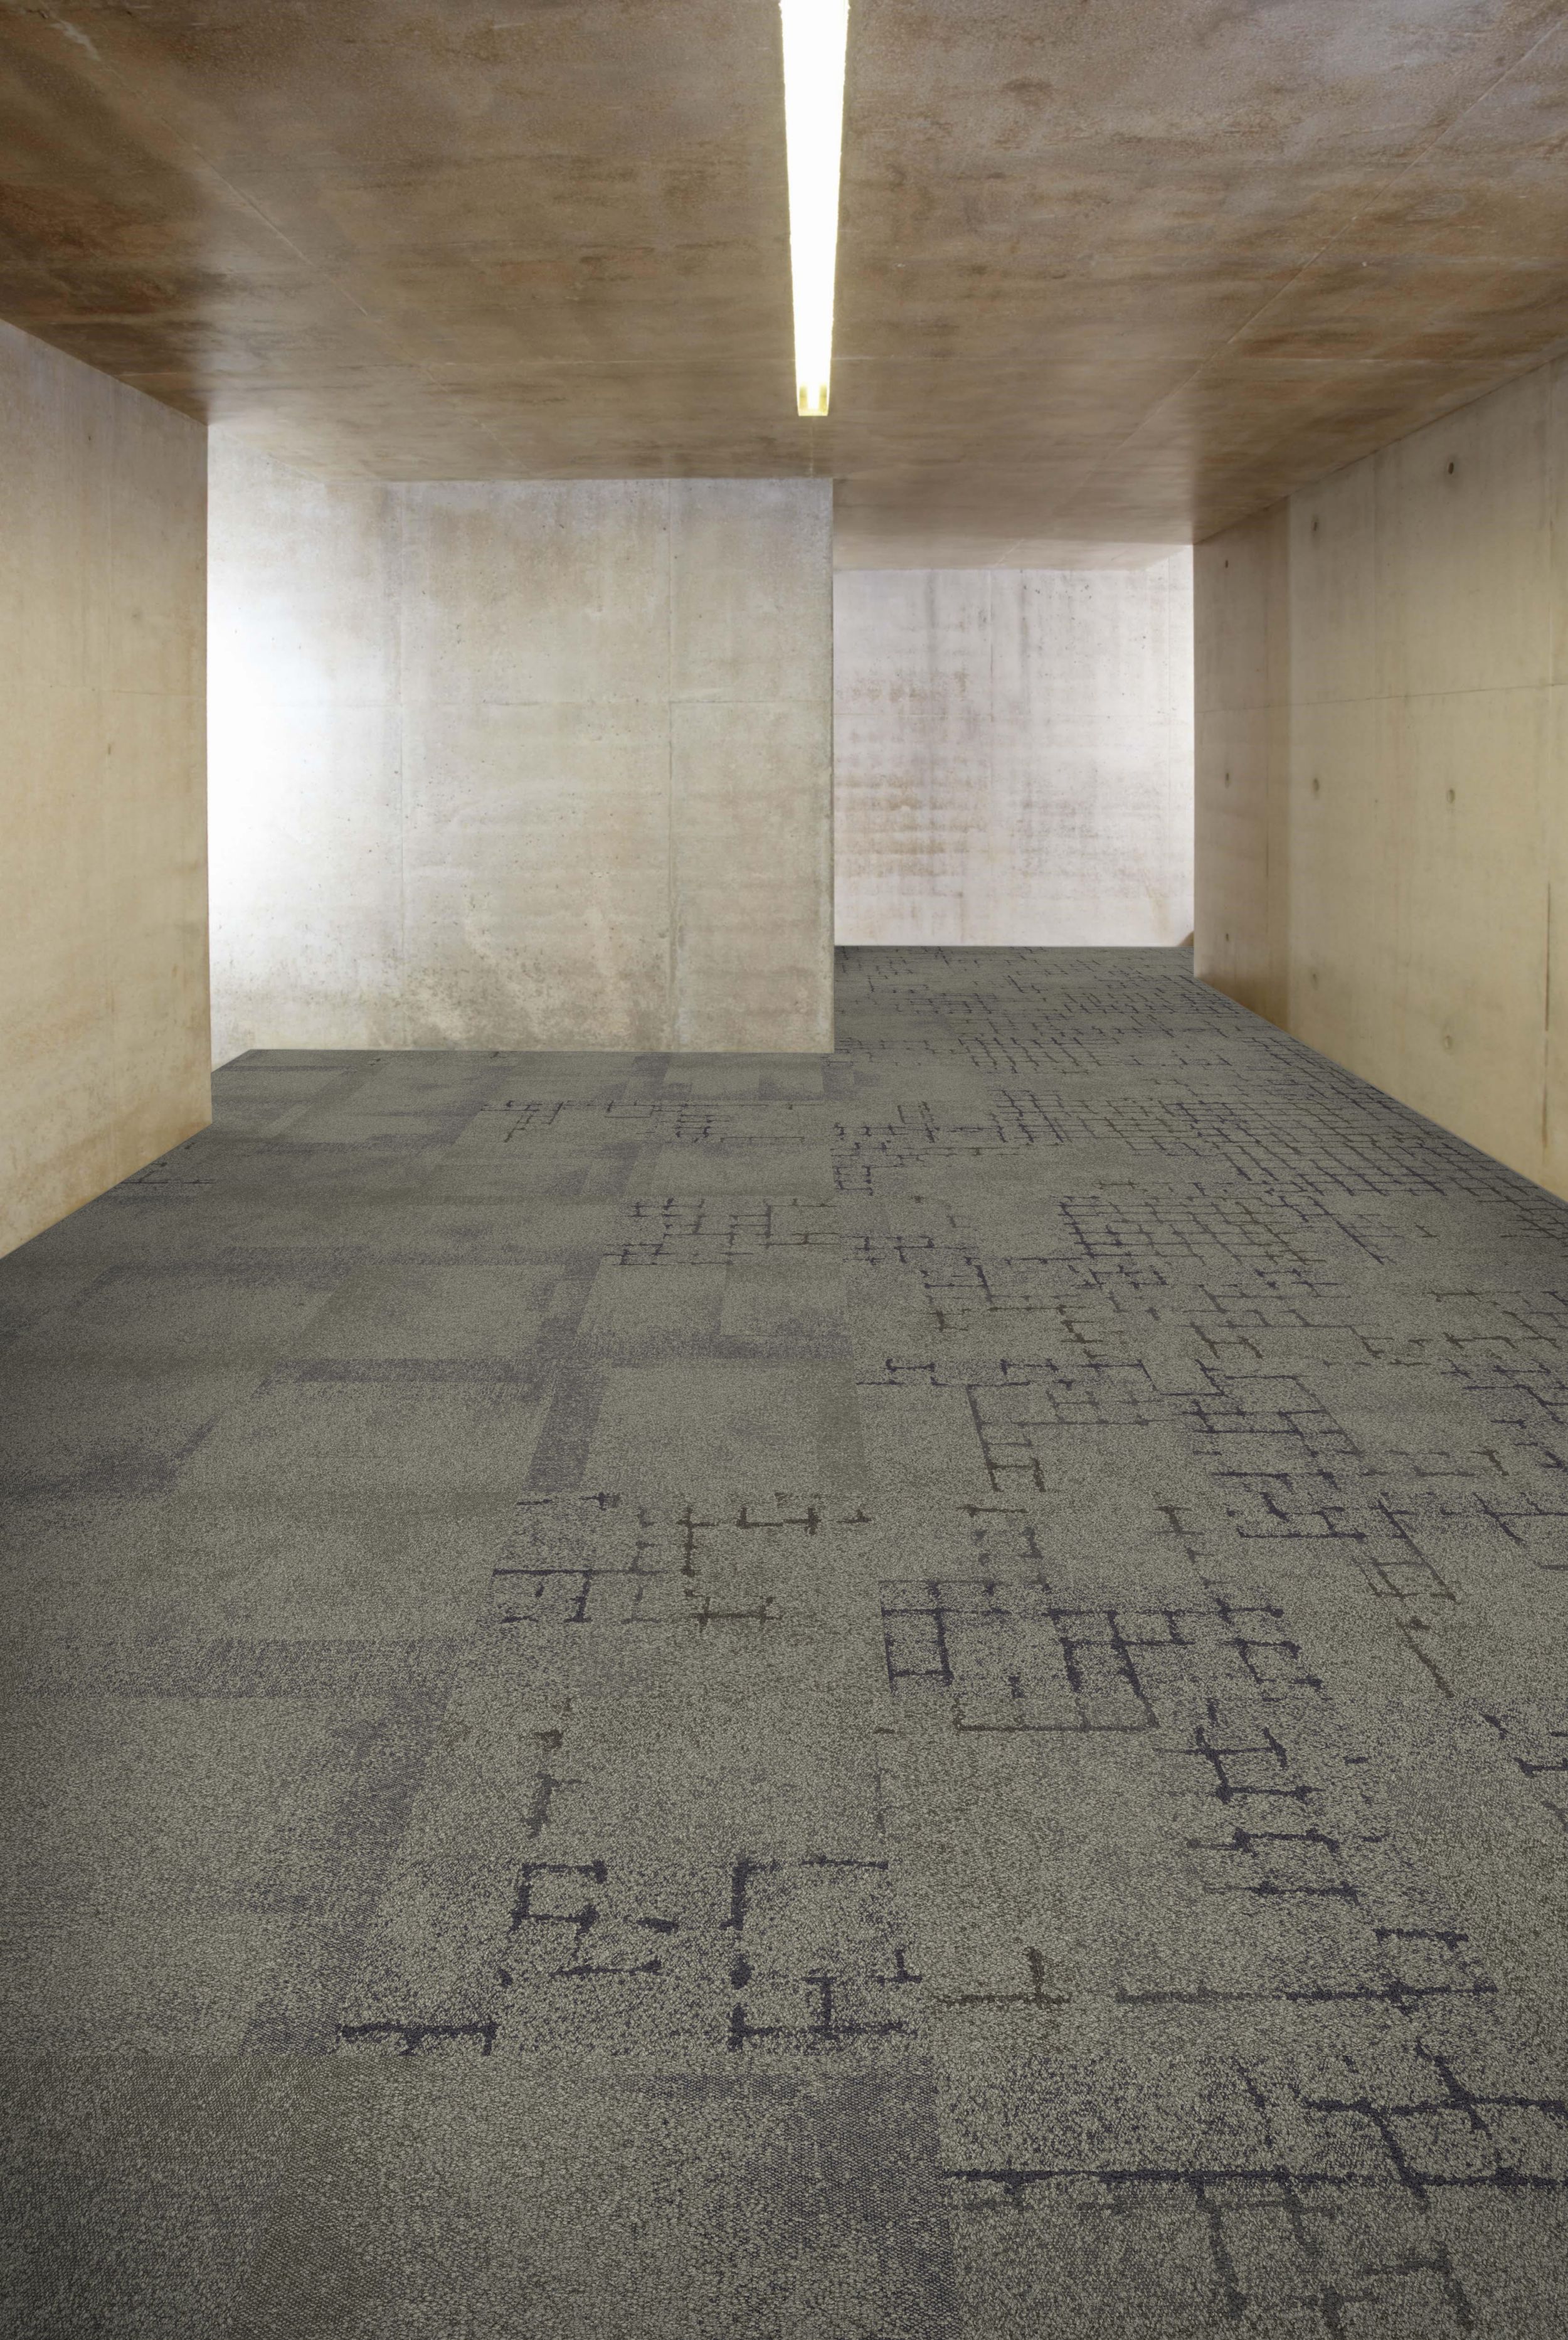 Interface Flagstone, Kerbstone and Sett in Stone carpet tile in corridor with concrete walls and ceiling número de imagen 2